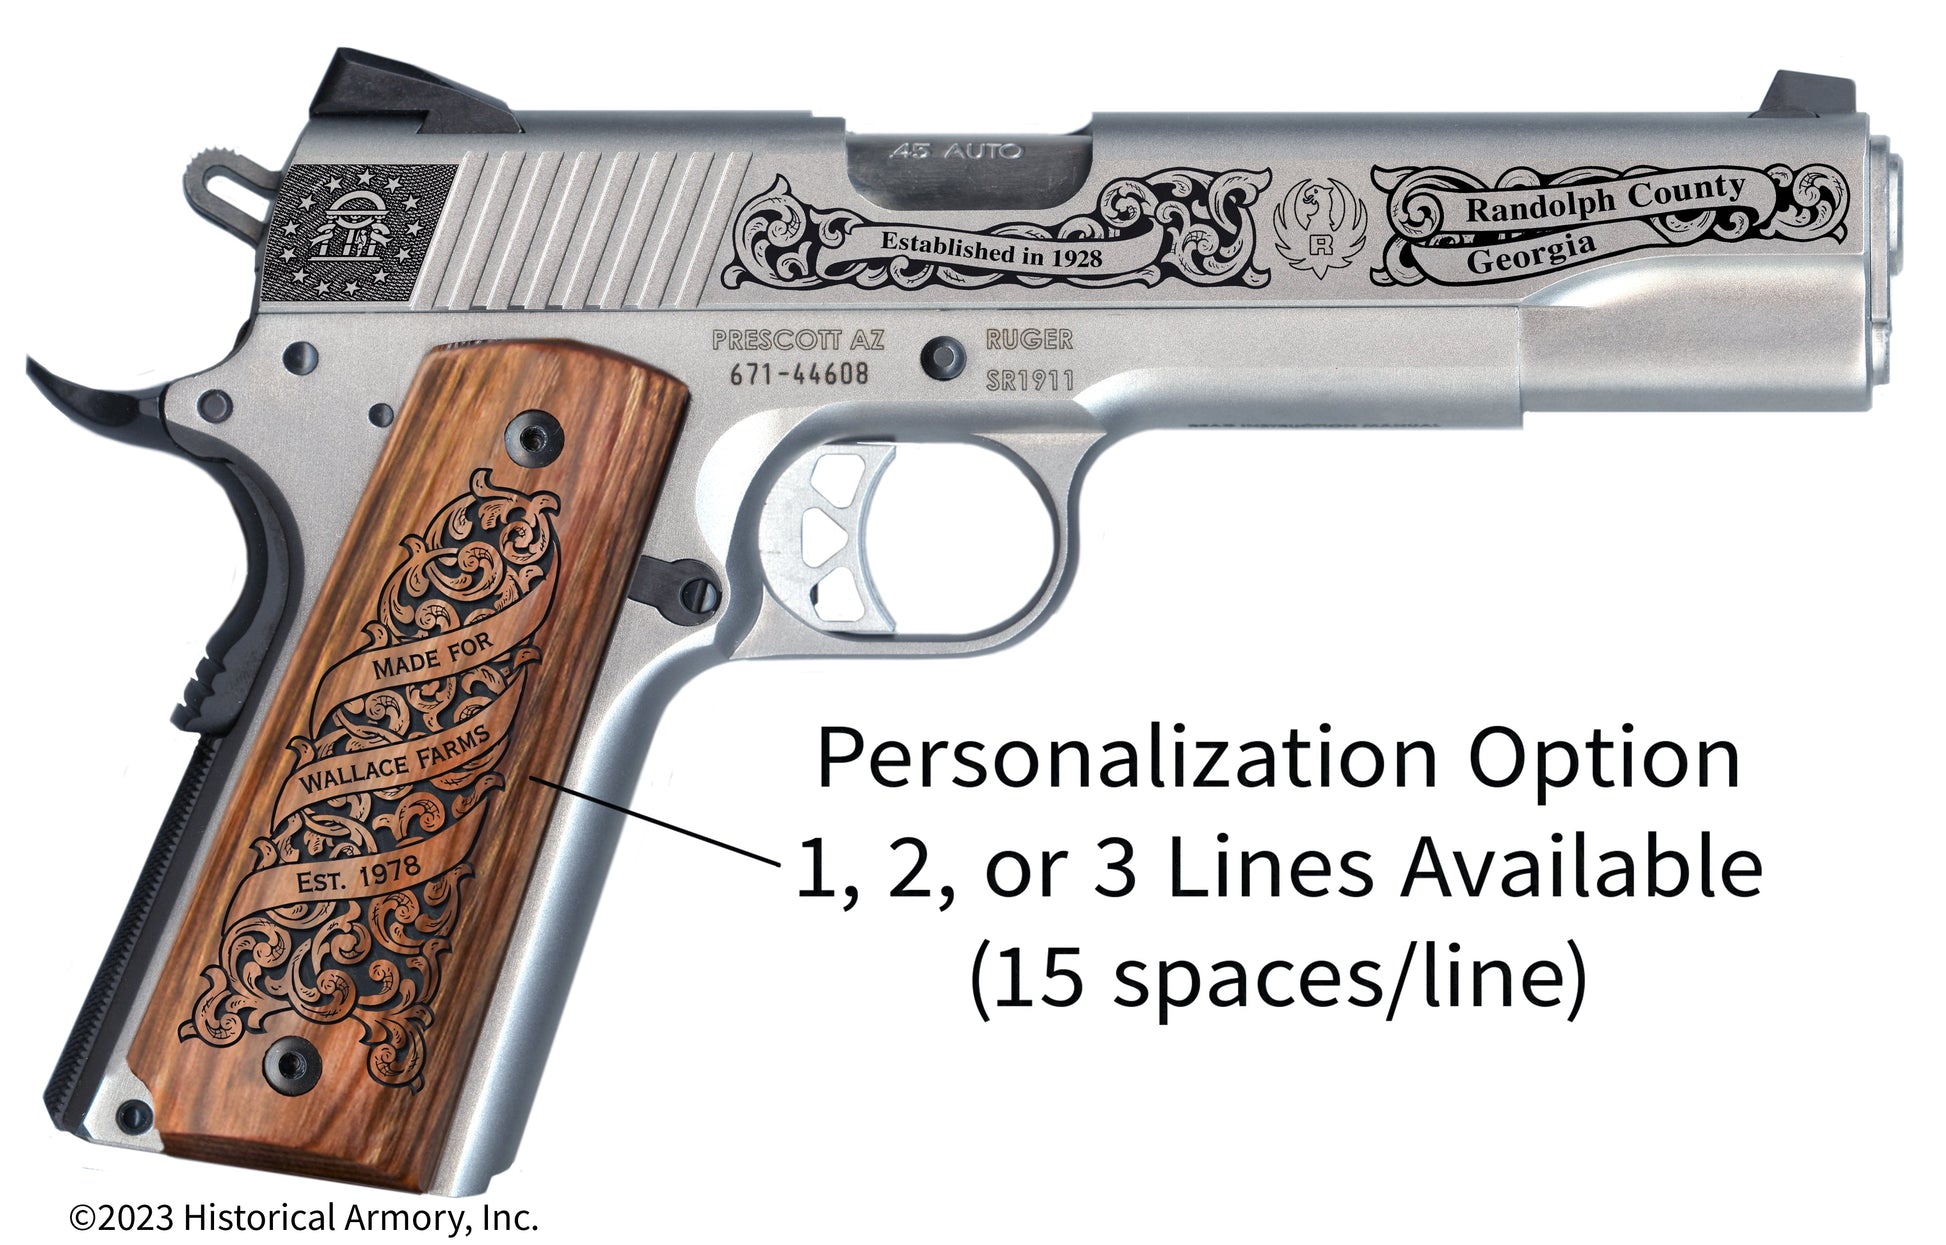 Randolph County Georgia Personalized Engraved .45 Auto Ruger 1911